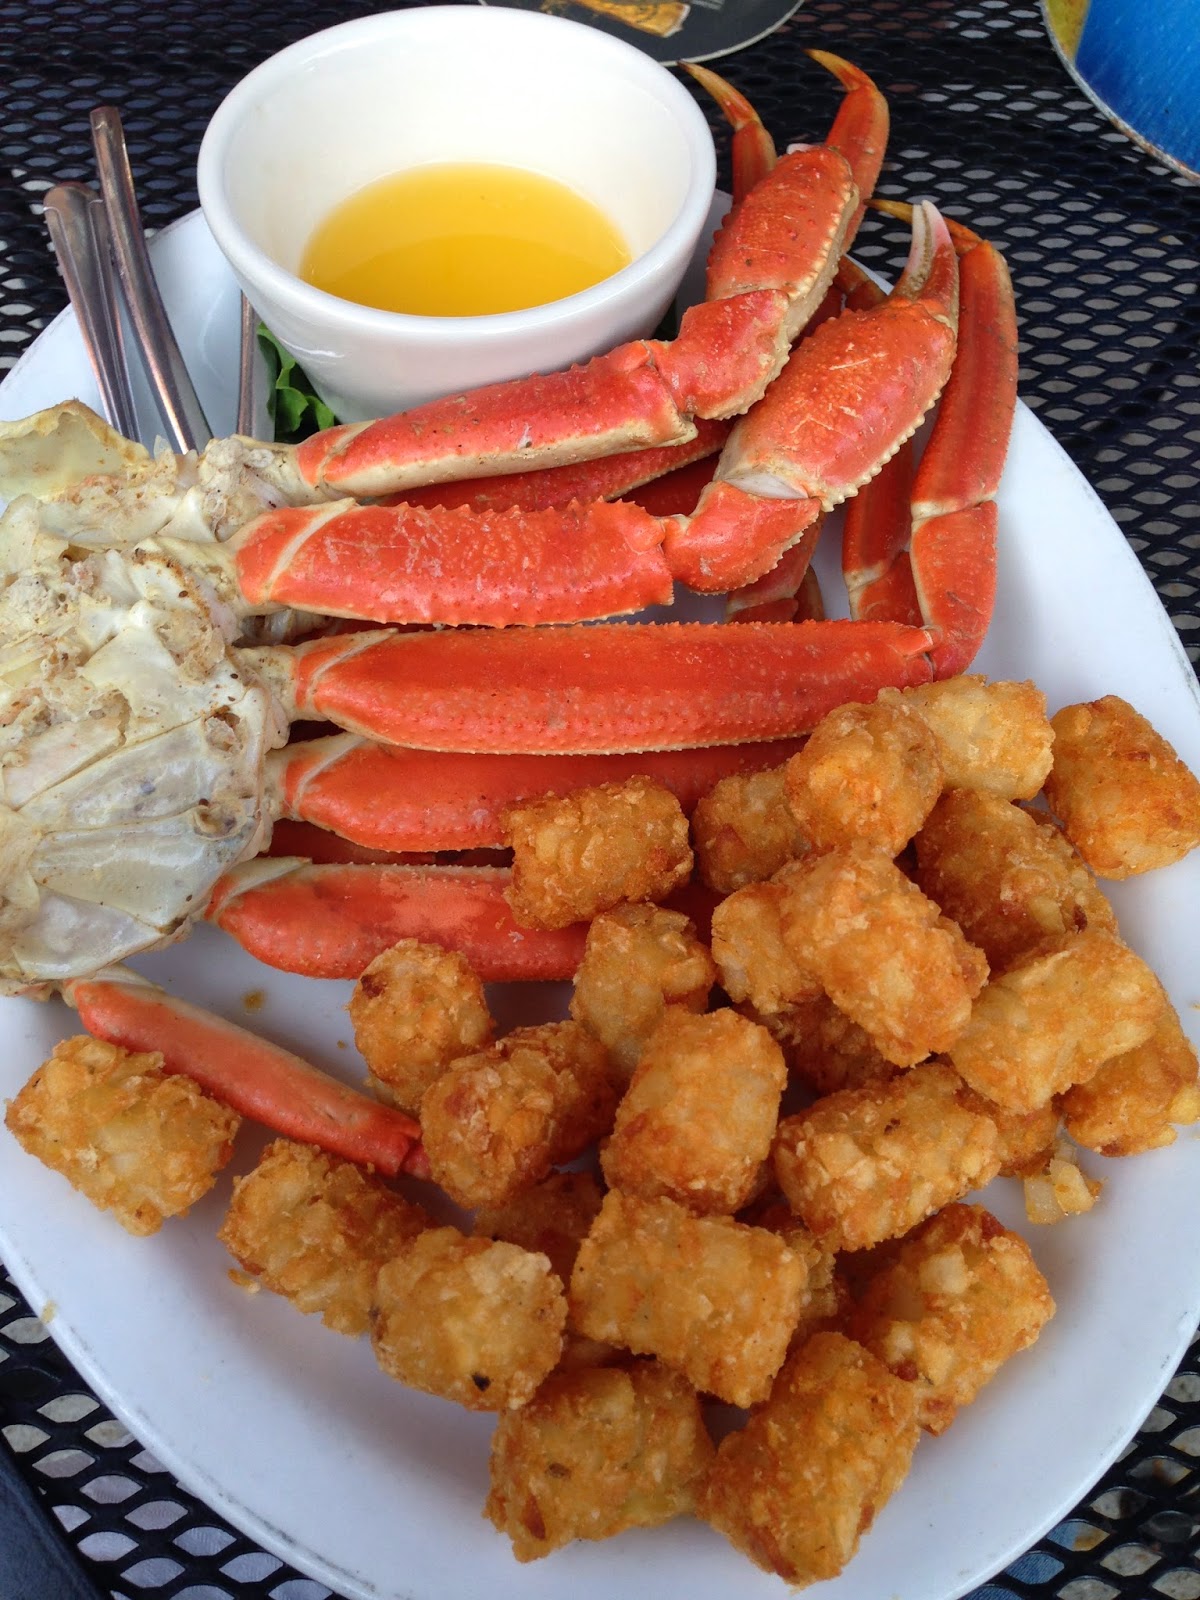 Nourishment on a Plate: All You Can Eat Crab Legs